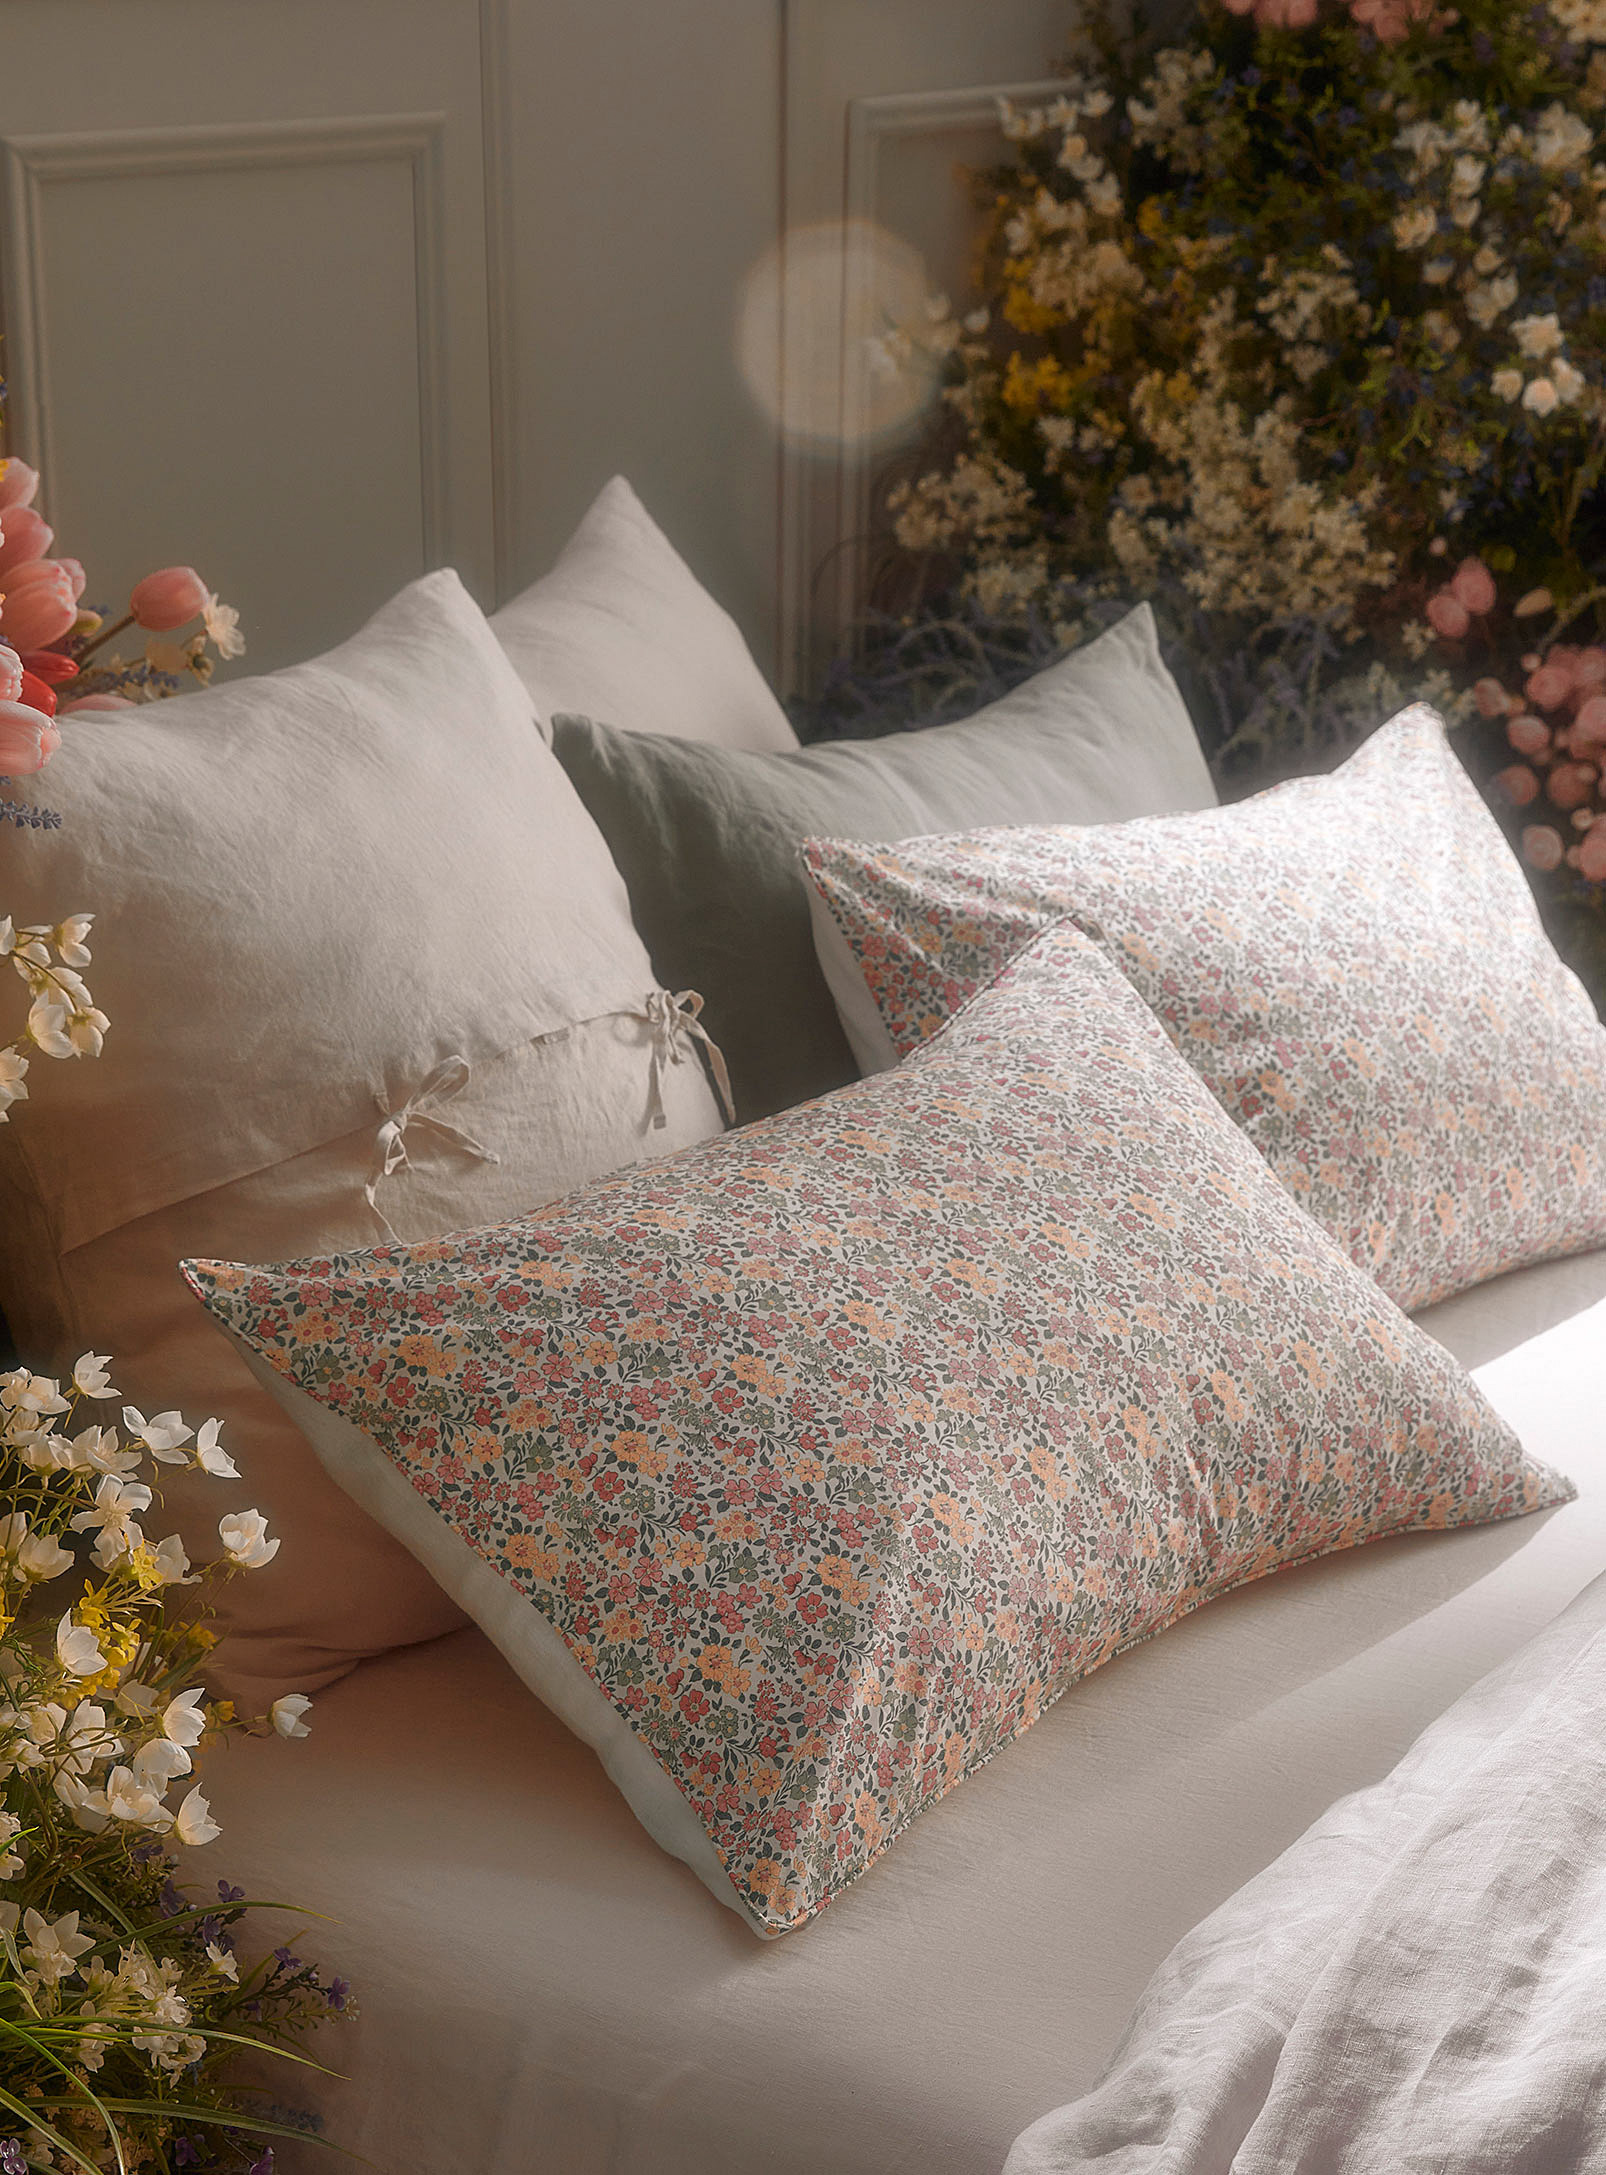 Simons Maison Annabella Floral Pillow Sham Made With Liberty Fabric In Gray